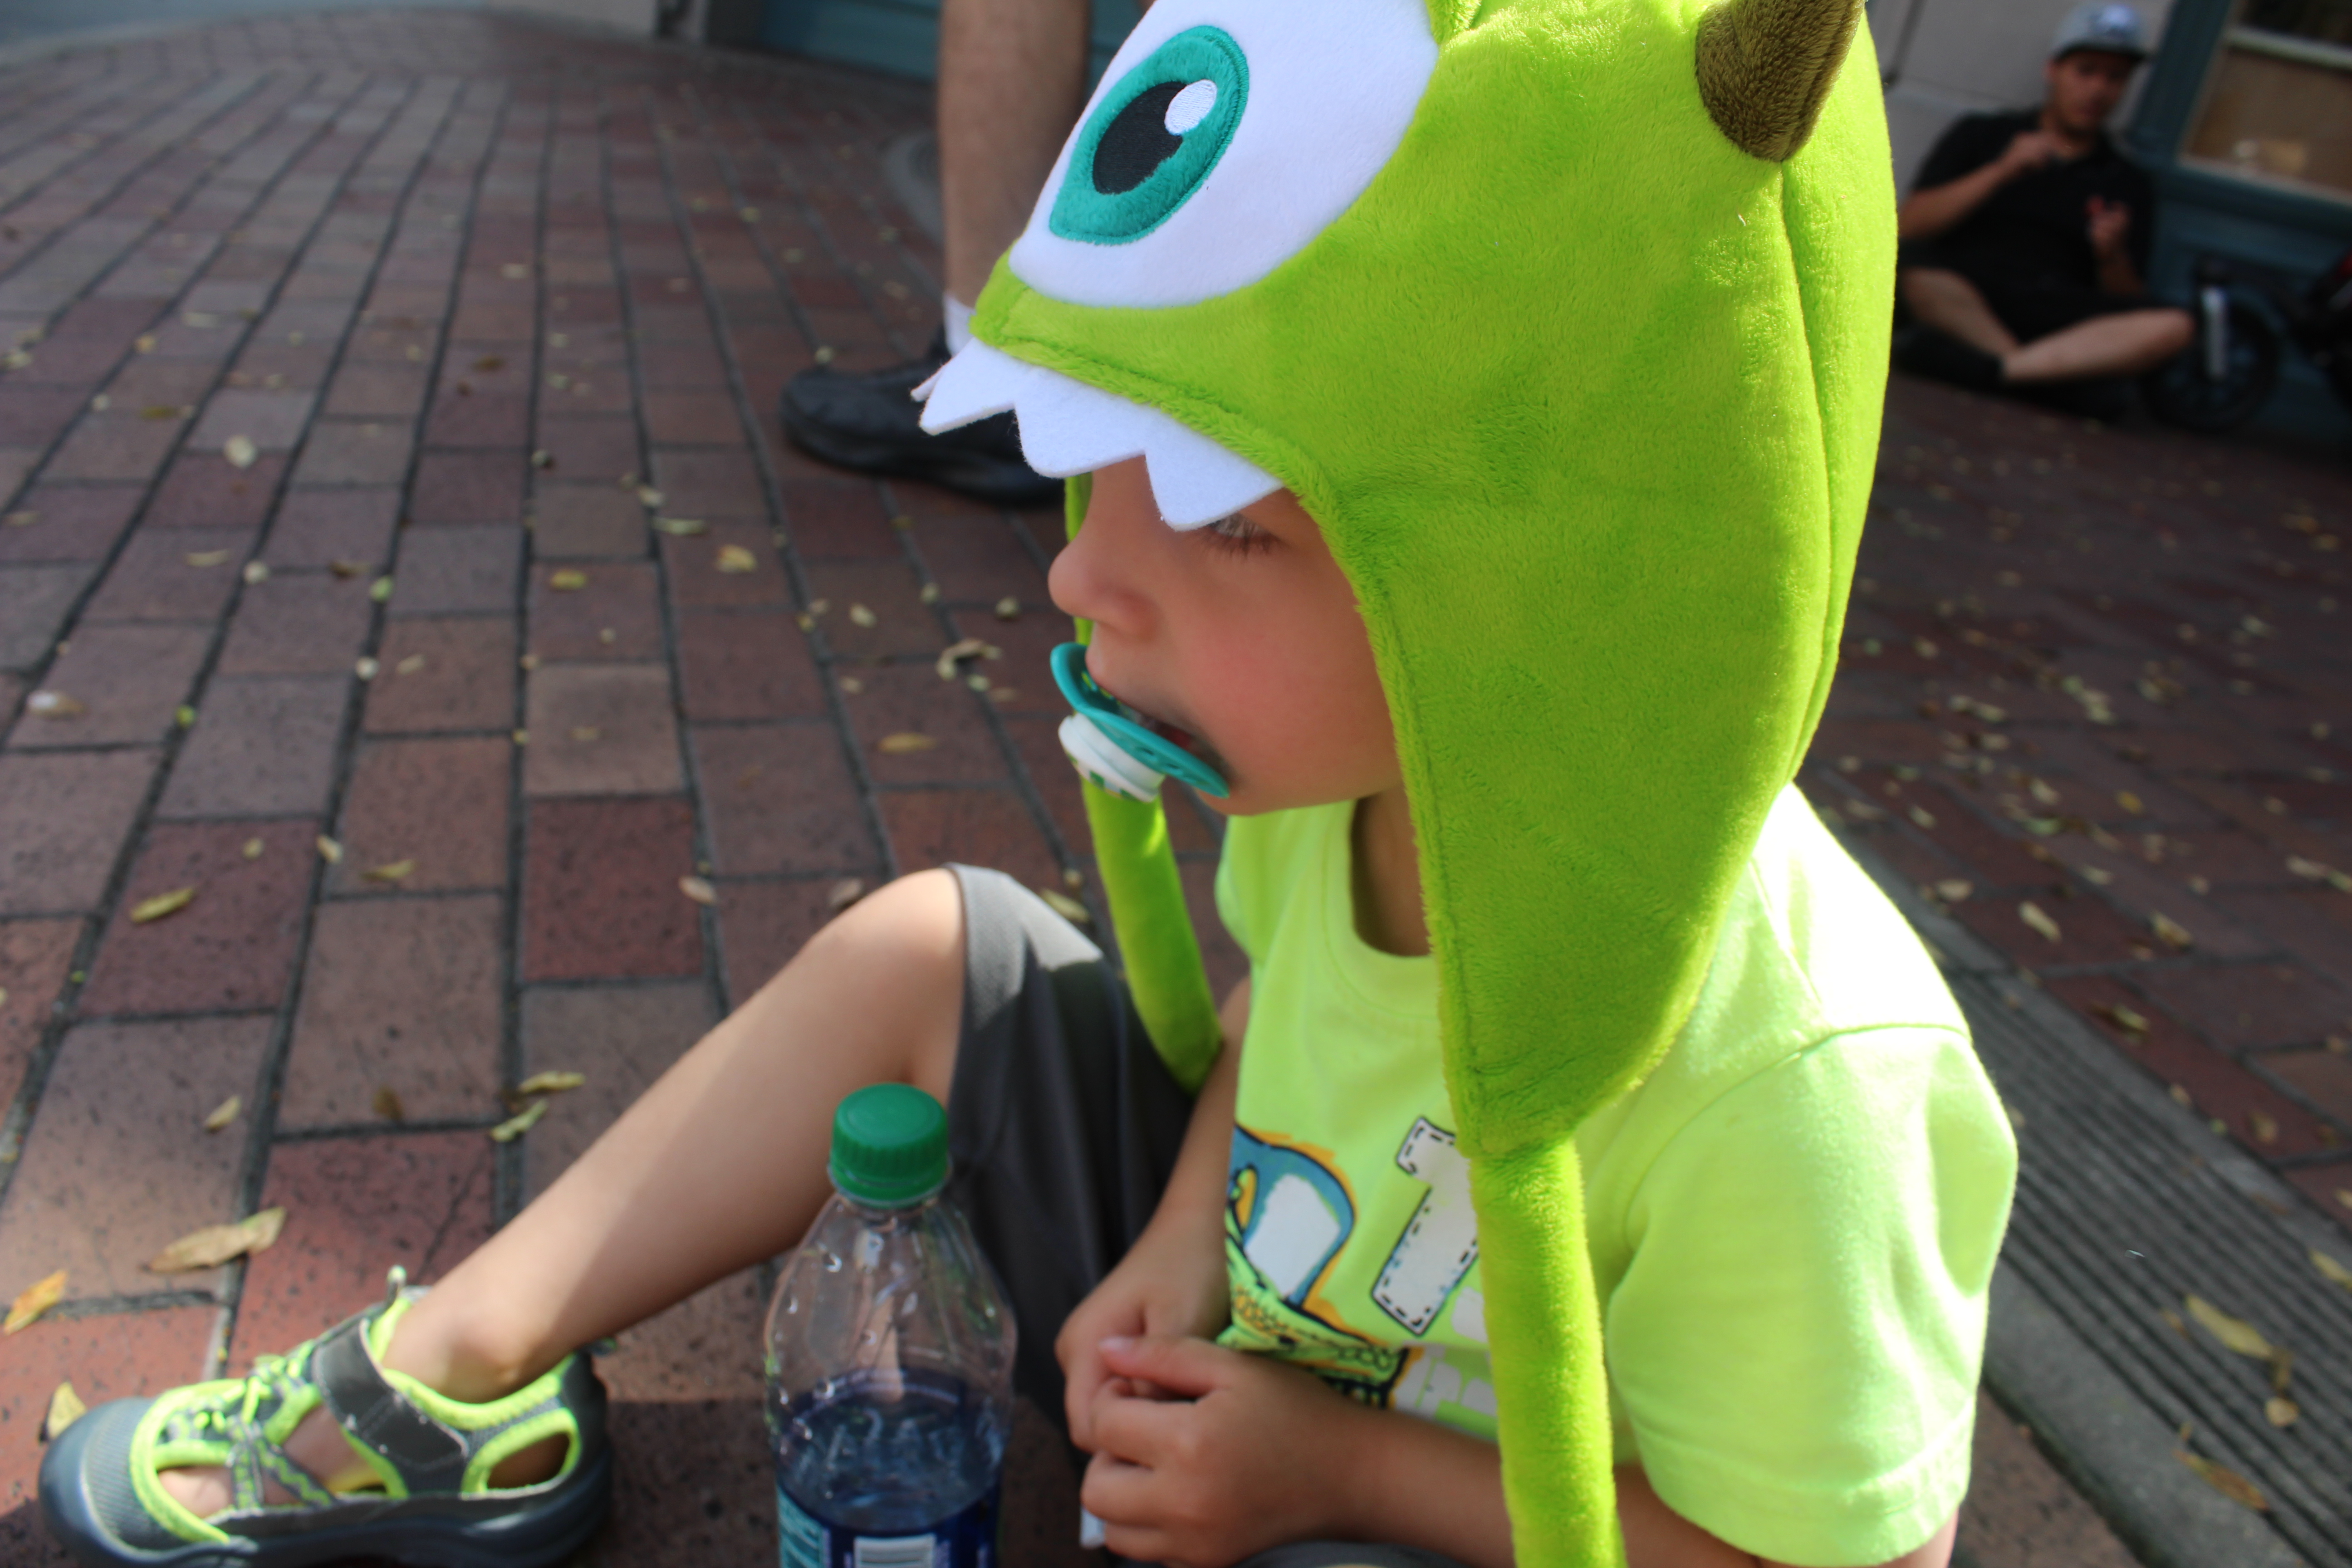 Mike Wazowski waiting for the stroller